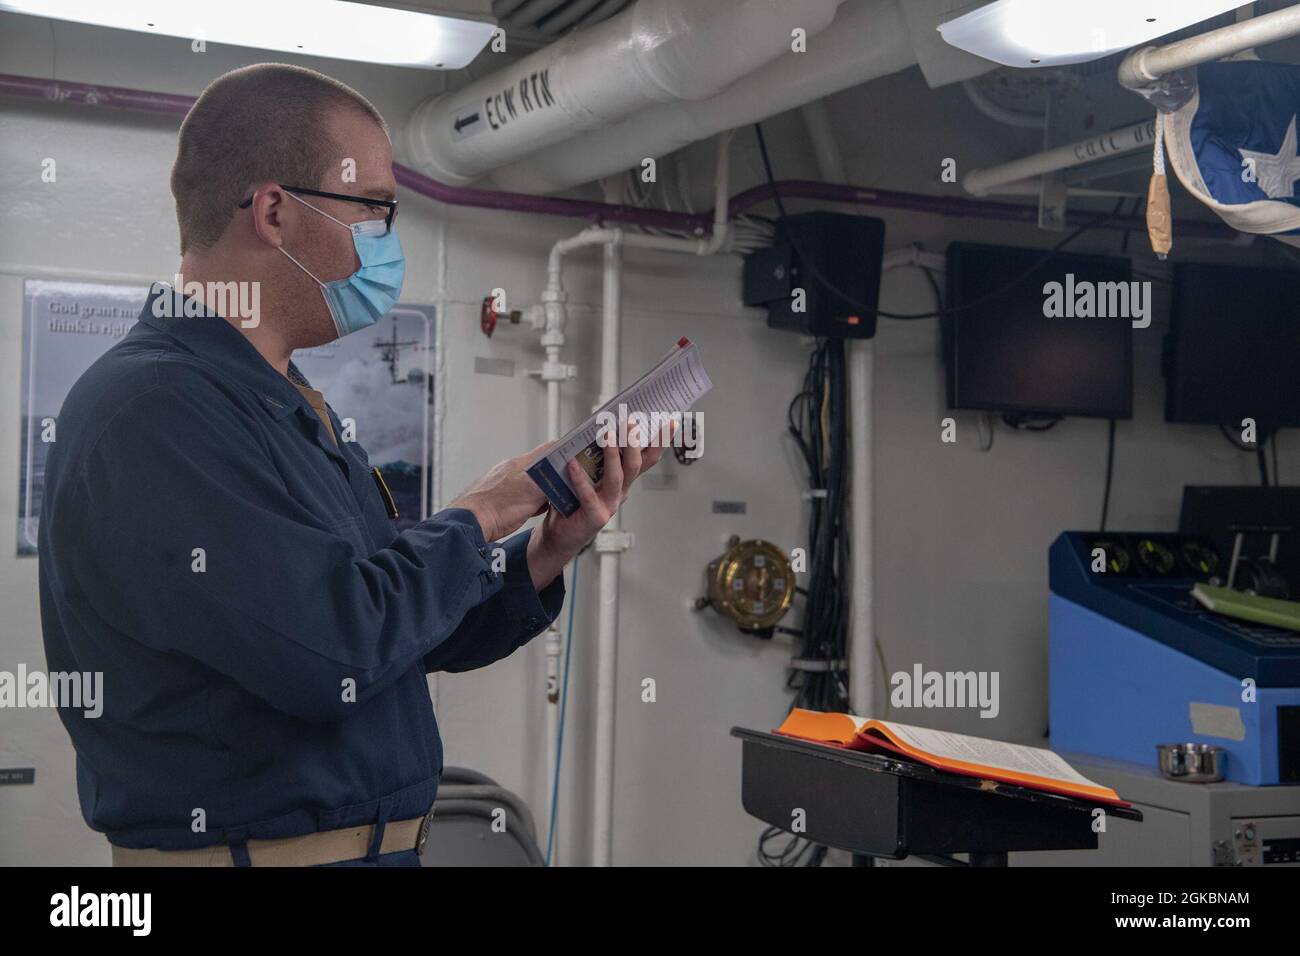 PACIFIC OCEAN (March 5, 2021) U.S. Navy Lt. Patrick Glynn, from Columbia, Miss., reads scripture during a service aboard the Ticonderoga-class guided-missile cruiser USS Bunker Hill (CG 52) March 5, 2021. Bunker Hill, part of the Theodore Roosevelt Carrier Strike Group, is on a scheduled deployment to the U.S. 7th Fleet area of operations. As the U.S. Navy’s largest forward-deployed fleet, 7th Fleet routinely operates and interacts with 35 maritime nations while conducting missions to preserve and protect a free and open Indo-Pacific Region. Stock Photo